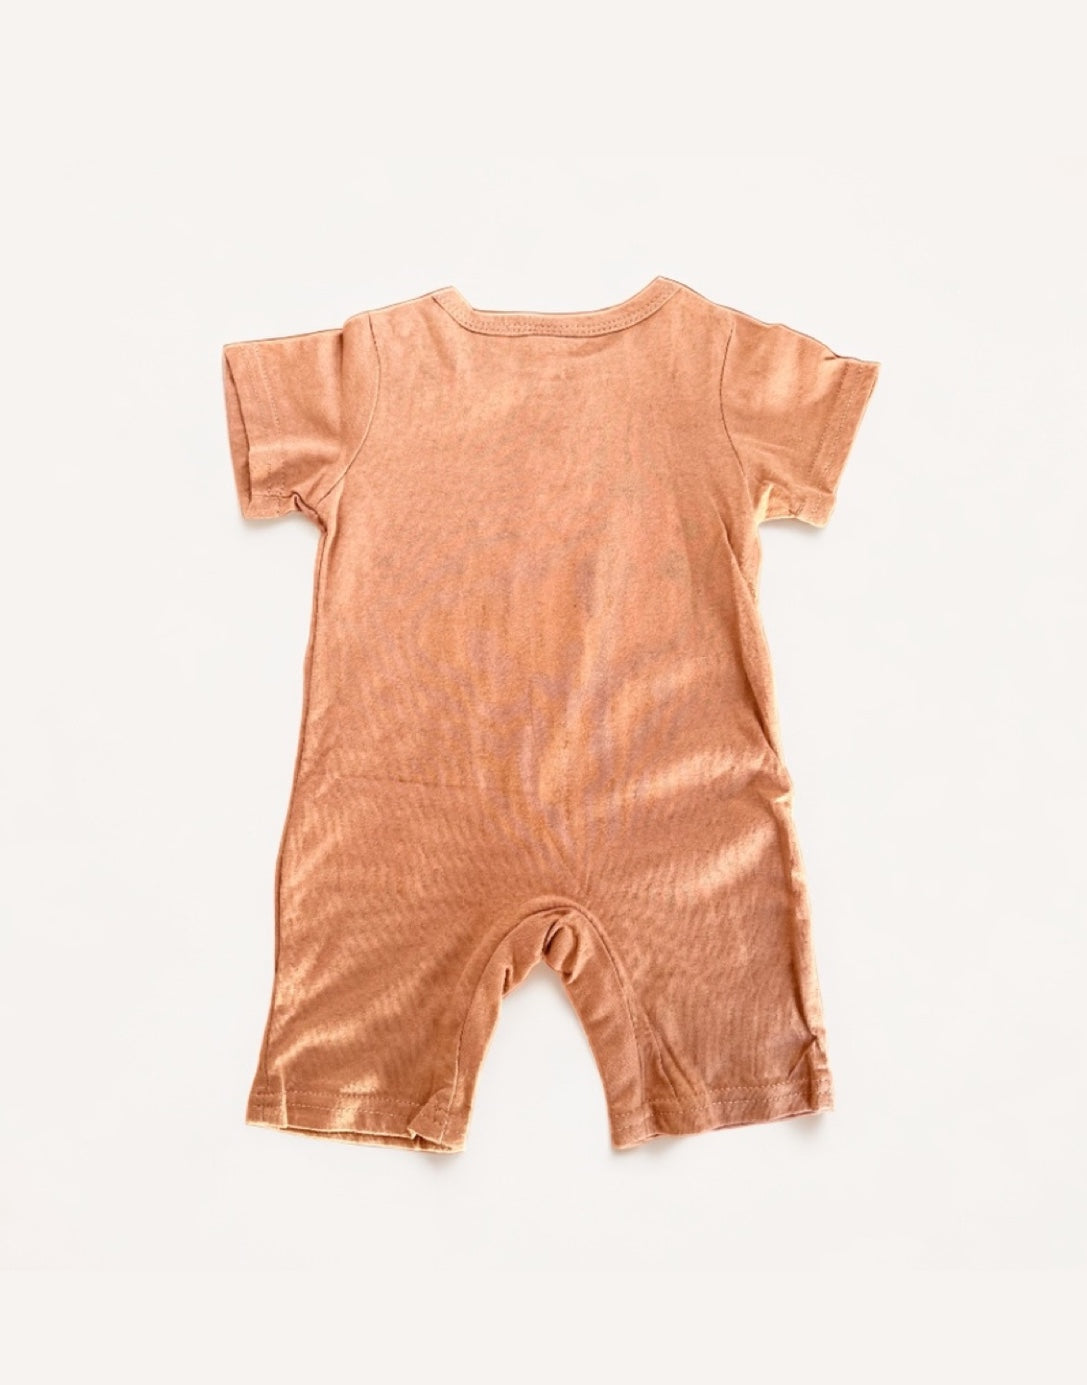 Back view of Baby Crew Neck T-Shirt Romper.